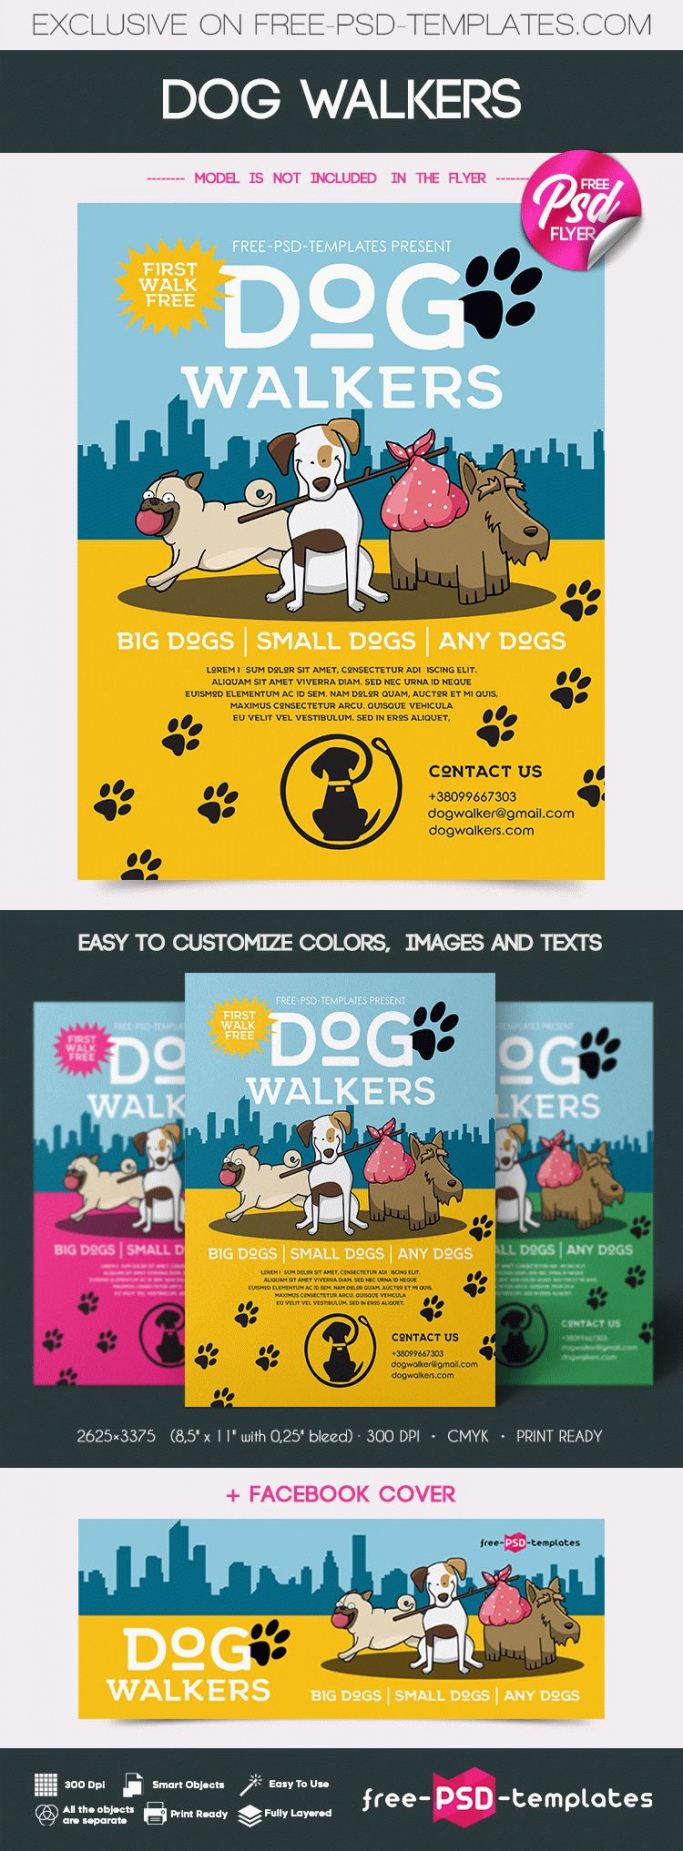 Editable Free Dog Walkers Flyer In Psd Free Psd Templates Dog Walking Poster Template Excel